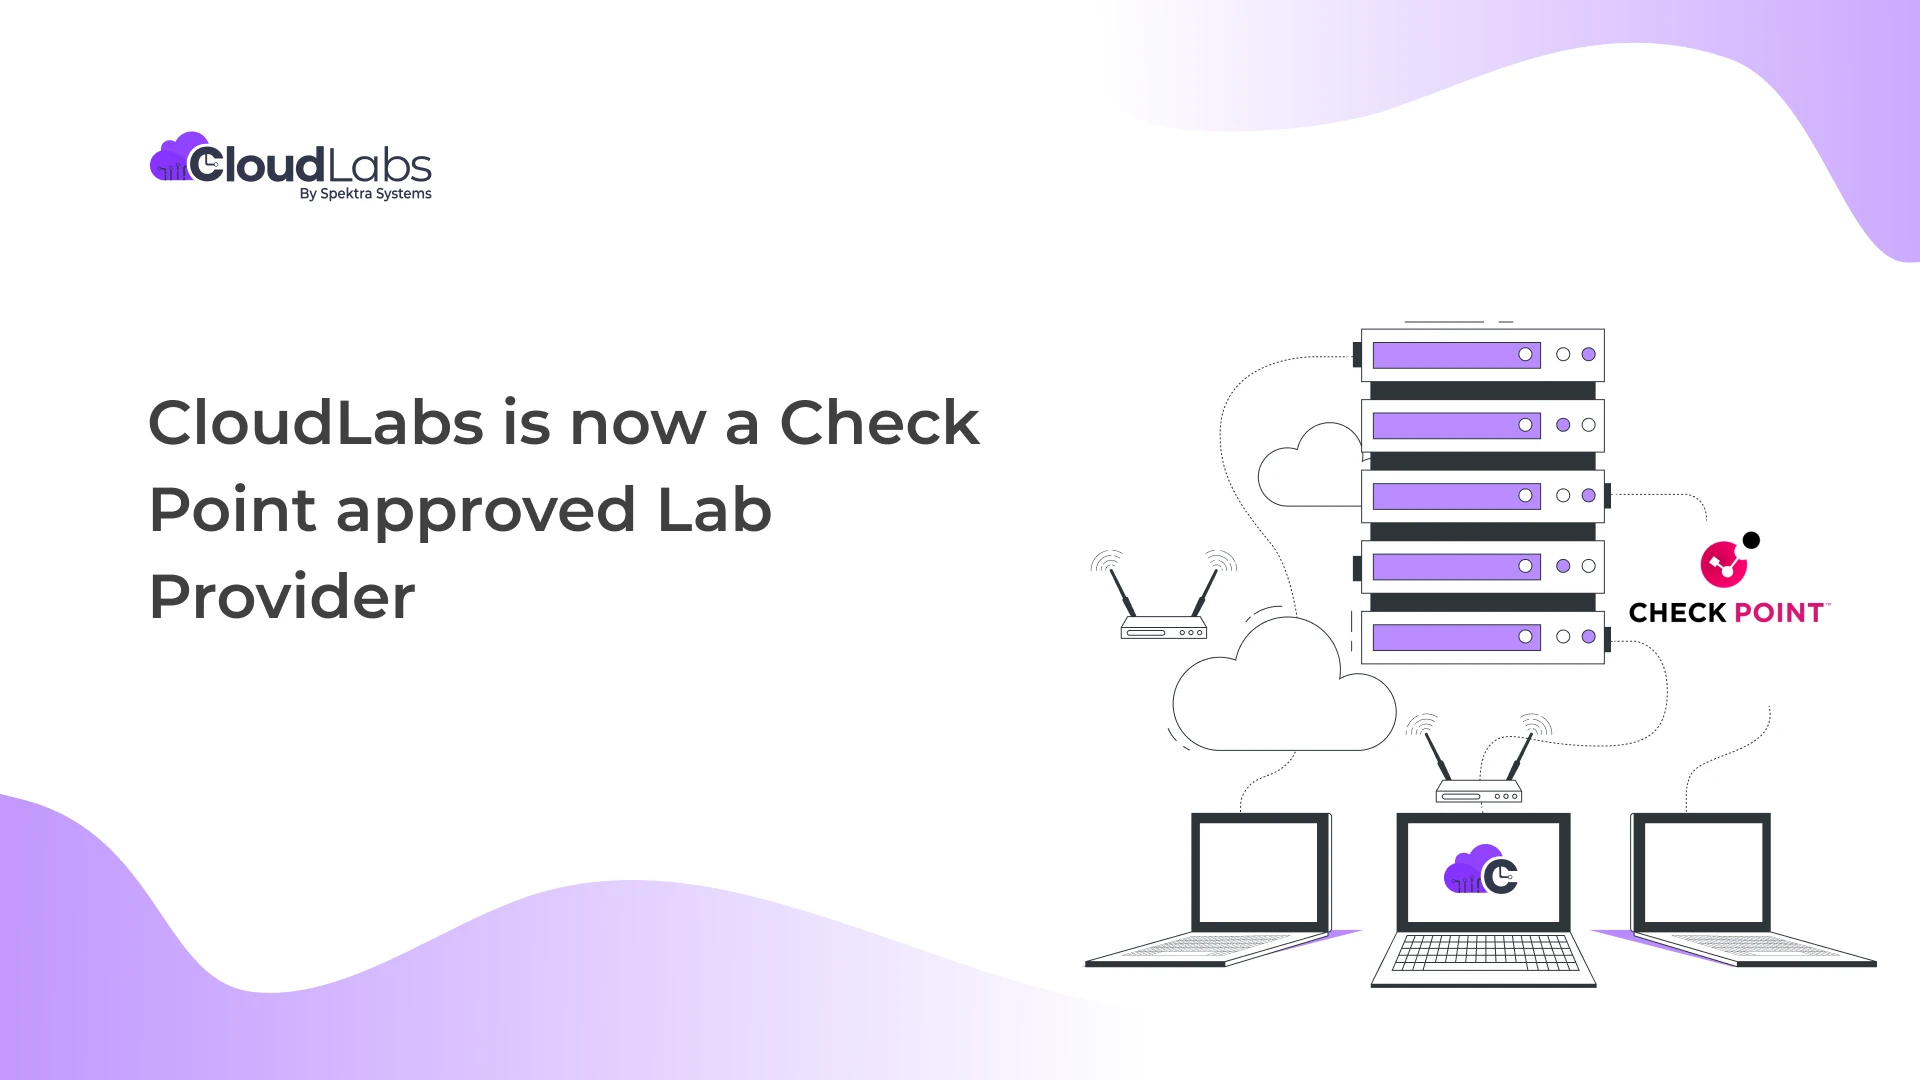 CloudLabs is now a Check Point approved Lab Provider